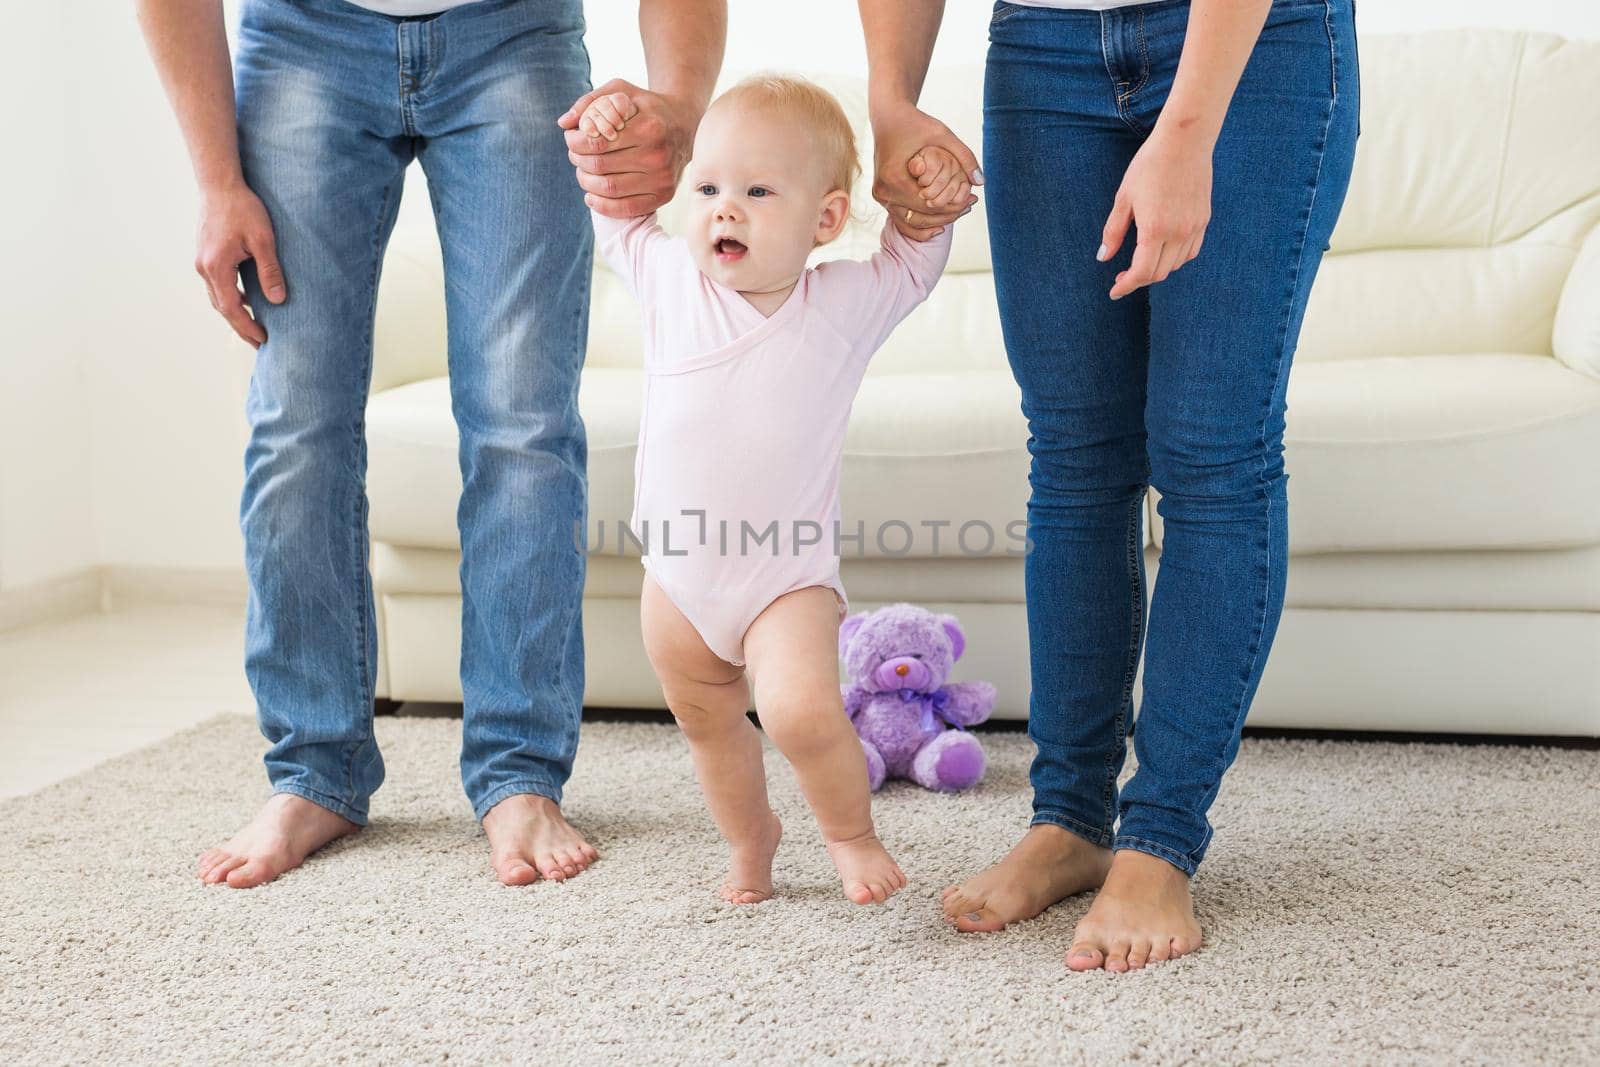 Baby taking first steps with mother's and father's help at home.